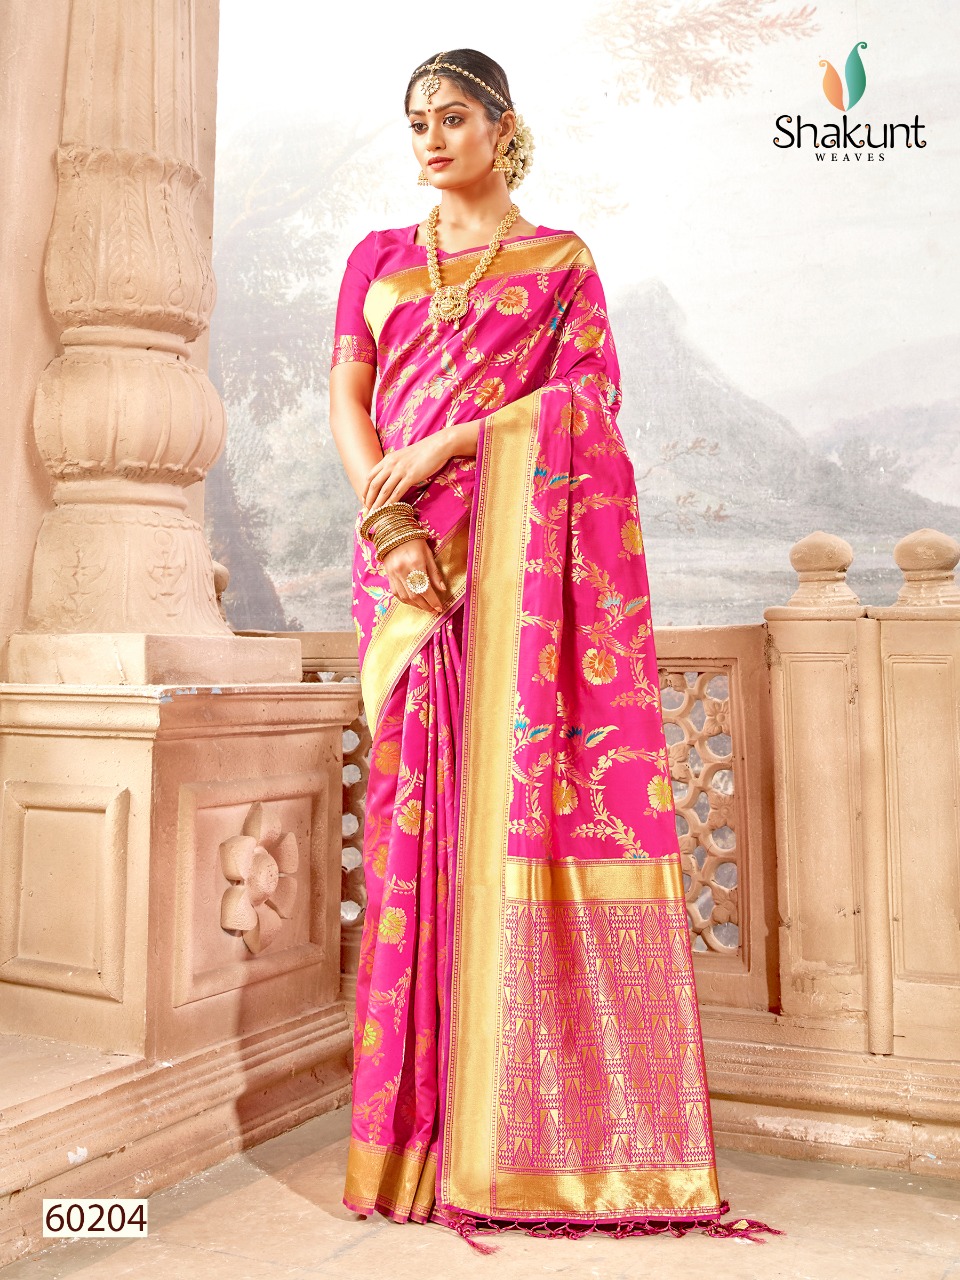 Shakunt weaves sharda festive wear Traditional sarees collection